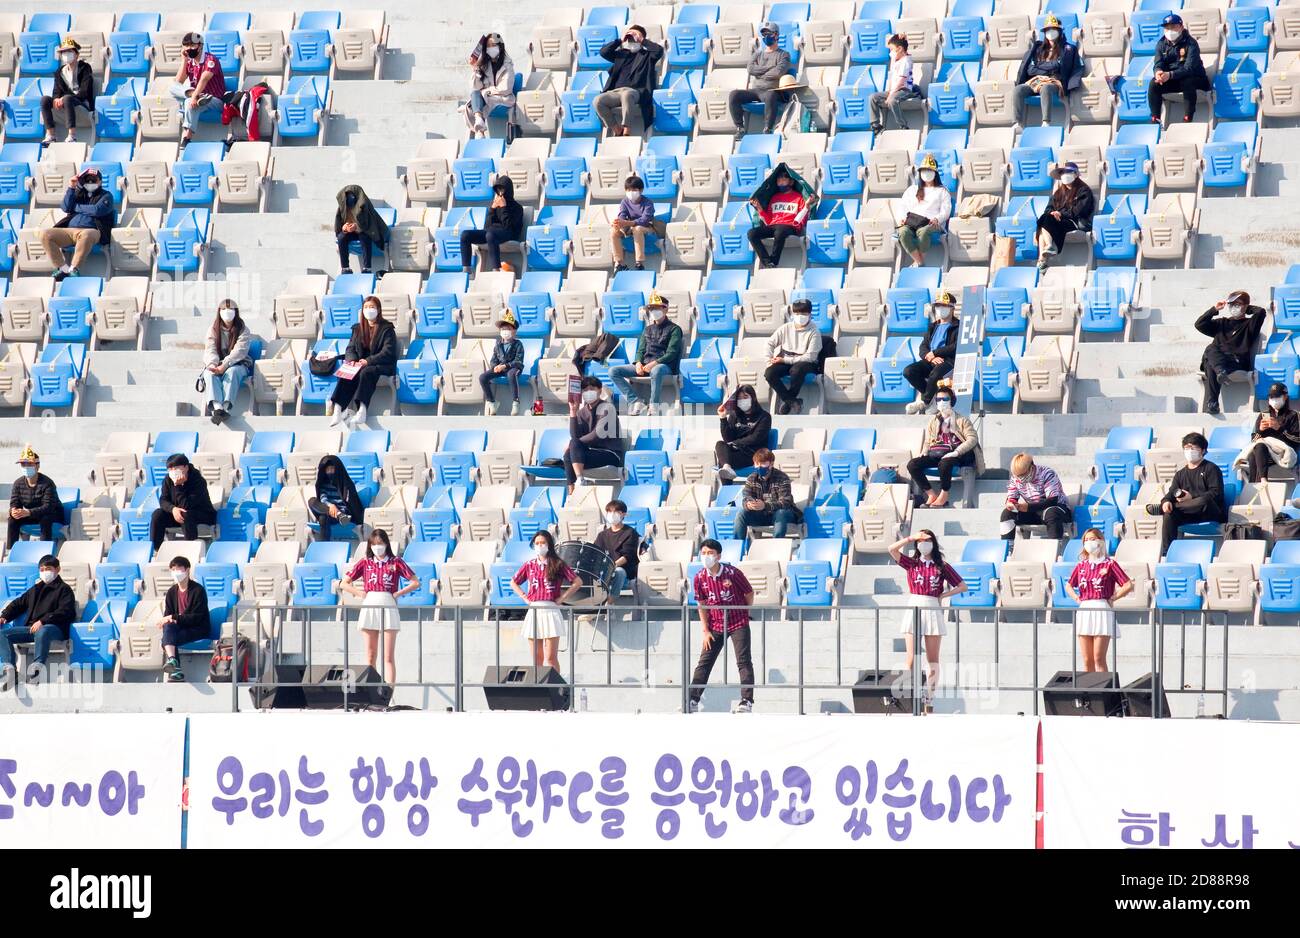 South Korea's K league soccer fans, Oct 18, 2020 - Football/Soccer : Socially distanced soccer fans during South Korea's 2020 K League 2 Round 24 match between Suwon FC 3-4 Jeonnam Dragons FC at Suwon Stadium in Suwon, south of Seoul, South Korea. Soccer fans were allowed again into K-League matches from October 16, following an easing of Covid-19 coronavirus restrictions. South Korean government eased the ban on soccer crowd after daily domestic infections of Covid-19 stayed in double figures for two weeks. (Photo by Lee Jae-Won/AFLO) (SOUTH KOREA) Stock Photo